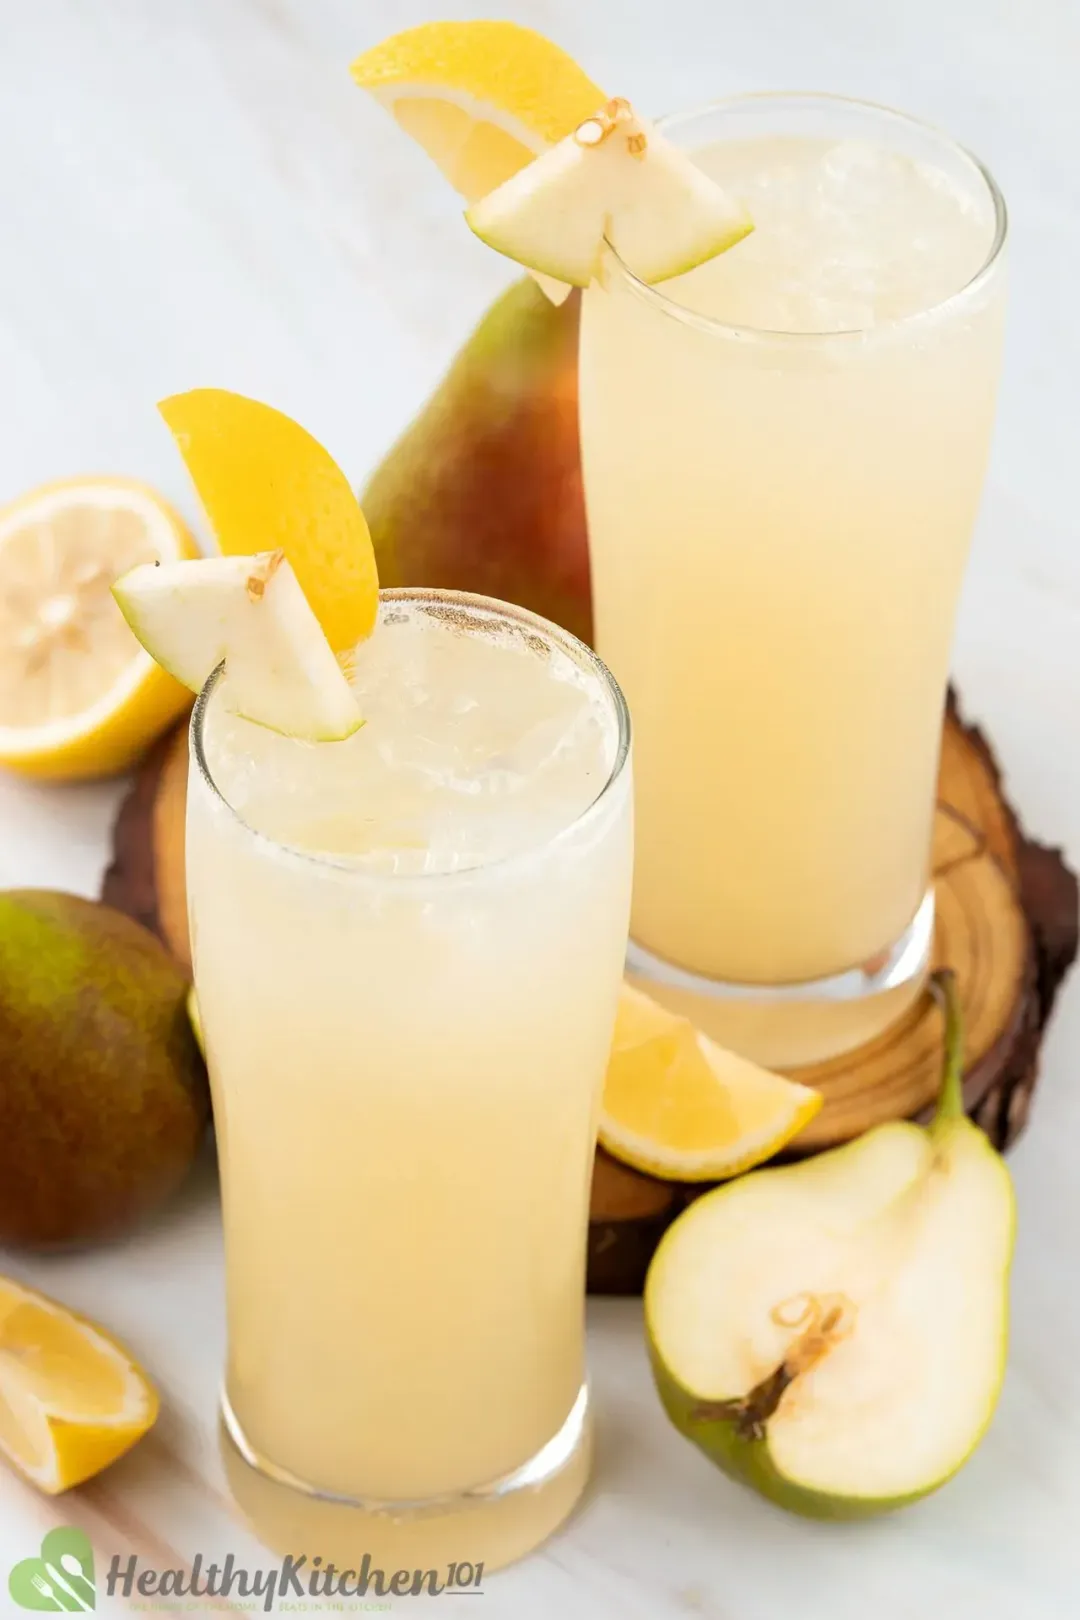 Two glasses of pear juice with ice, garnished with pear halves and lemon wedges